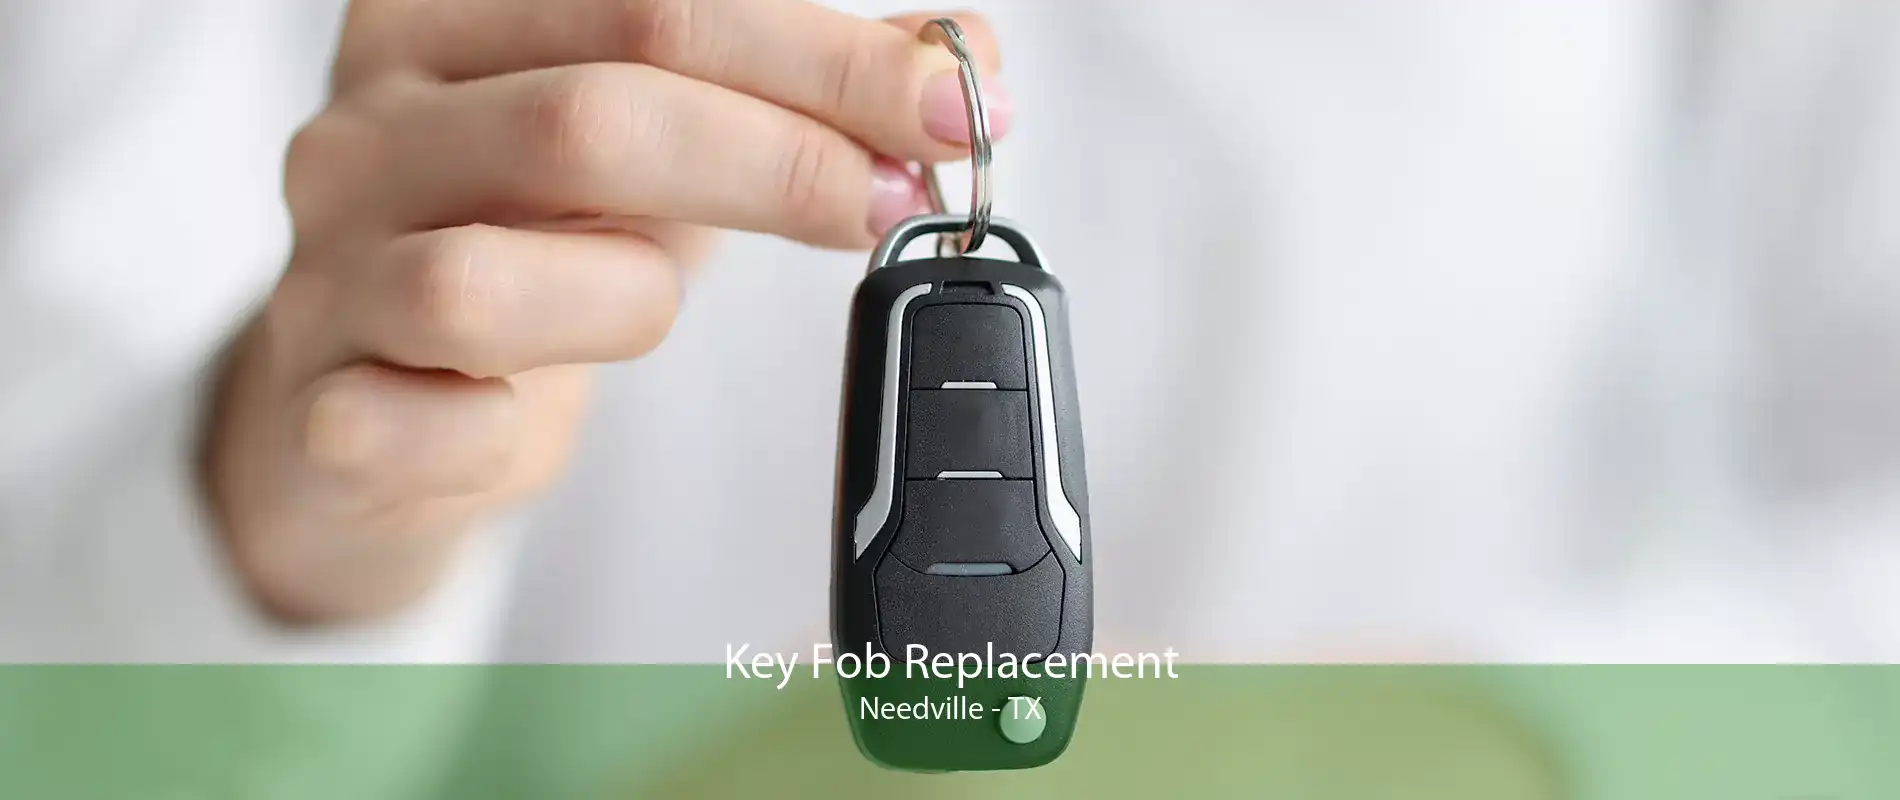 Key Fob Replacement Needville - TX